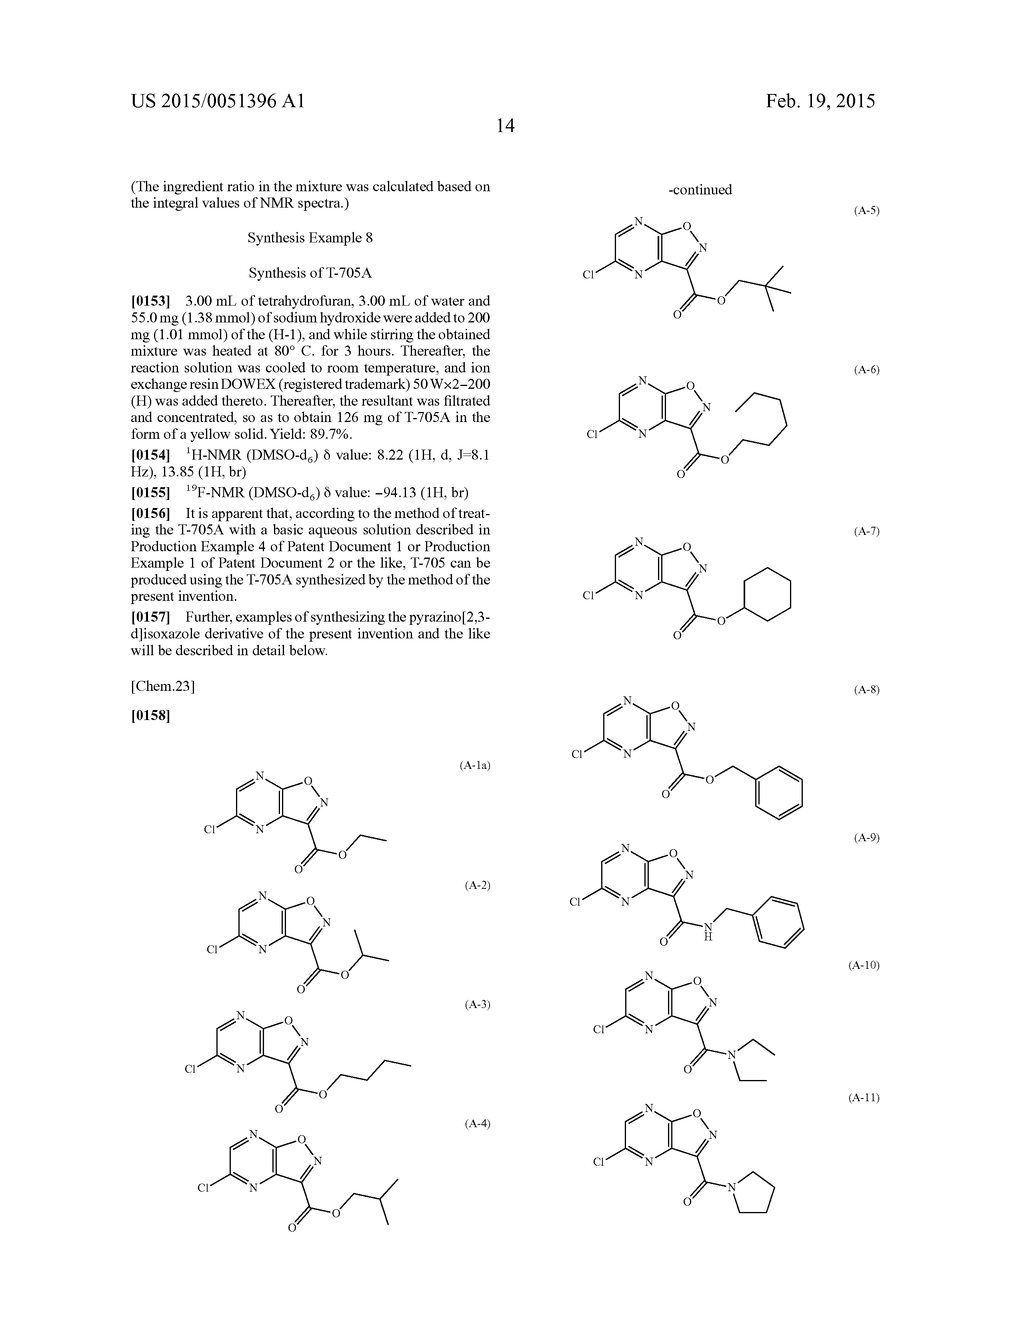 SUBSTITUTED PYRAZINO[2,3-D]ISOOXAZOLES AS INTERMEDIATES FOR THE SYNTHESIS     OF SUBSTITUTED PYRAZINECARBOXAMIDES - diagram, schematic, and image 15